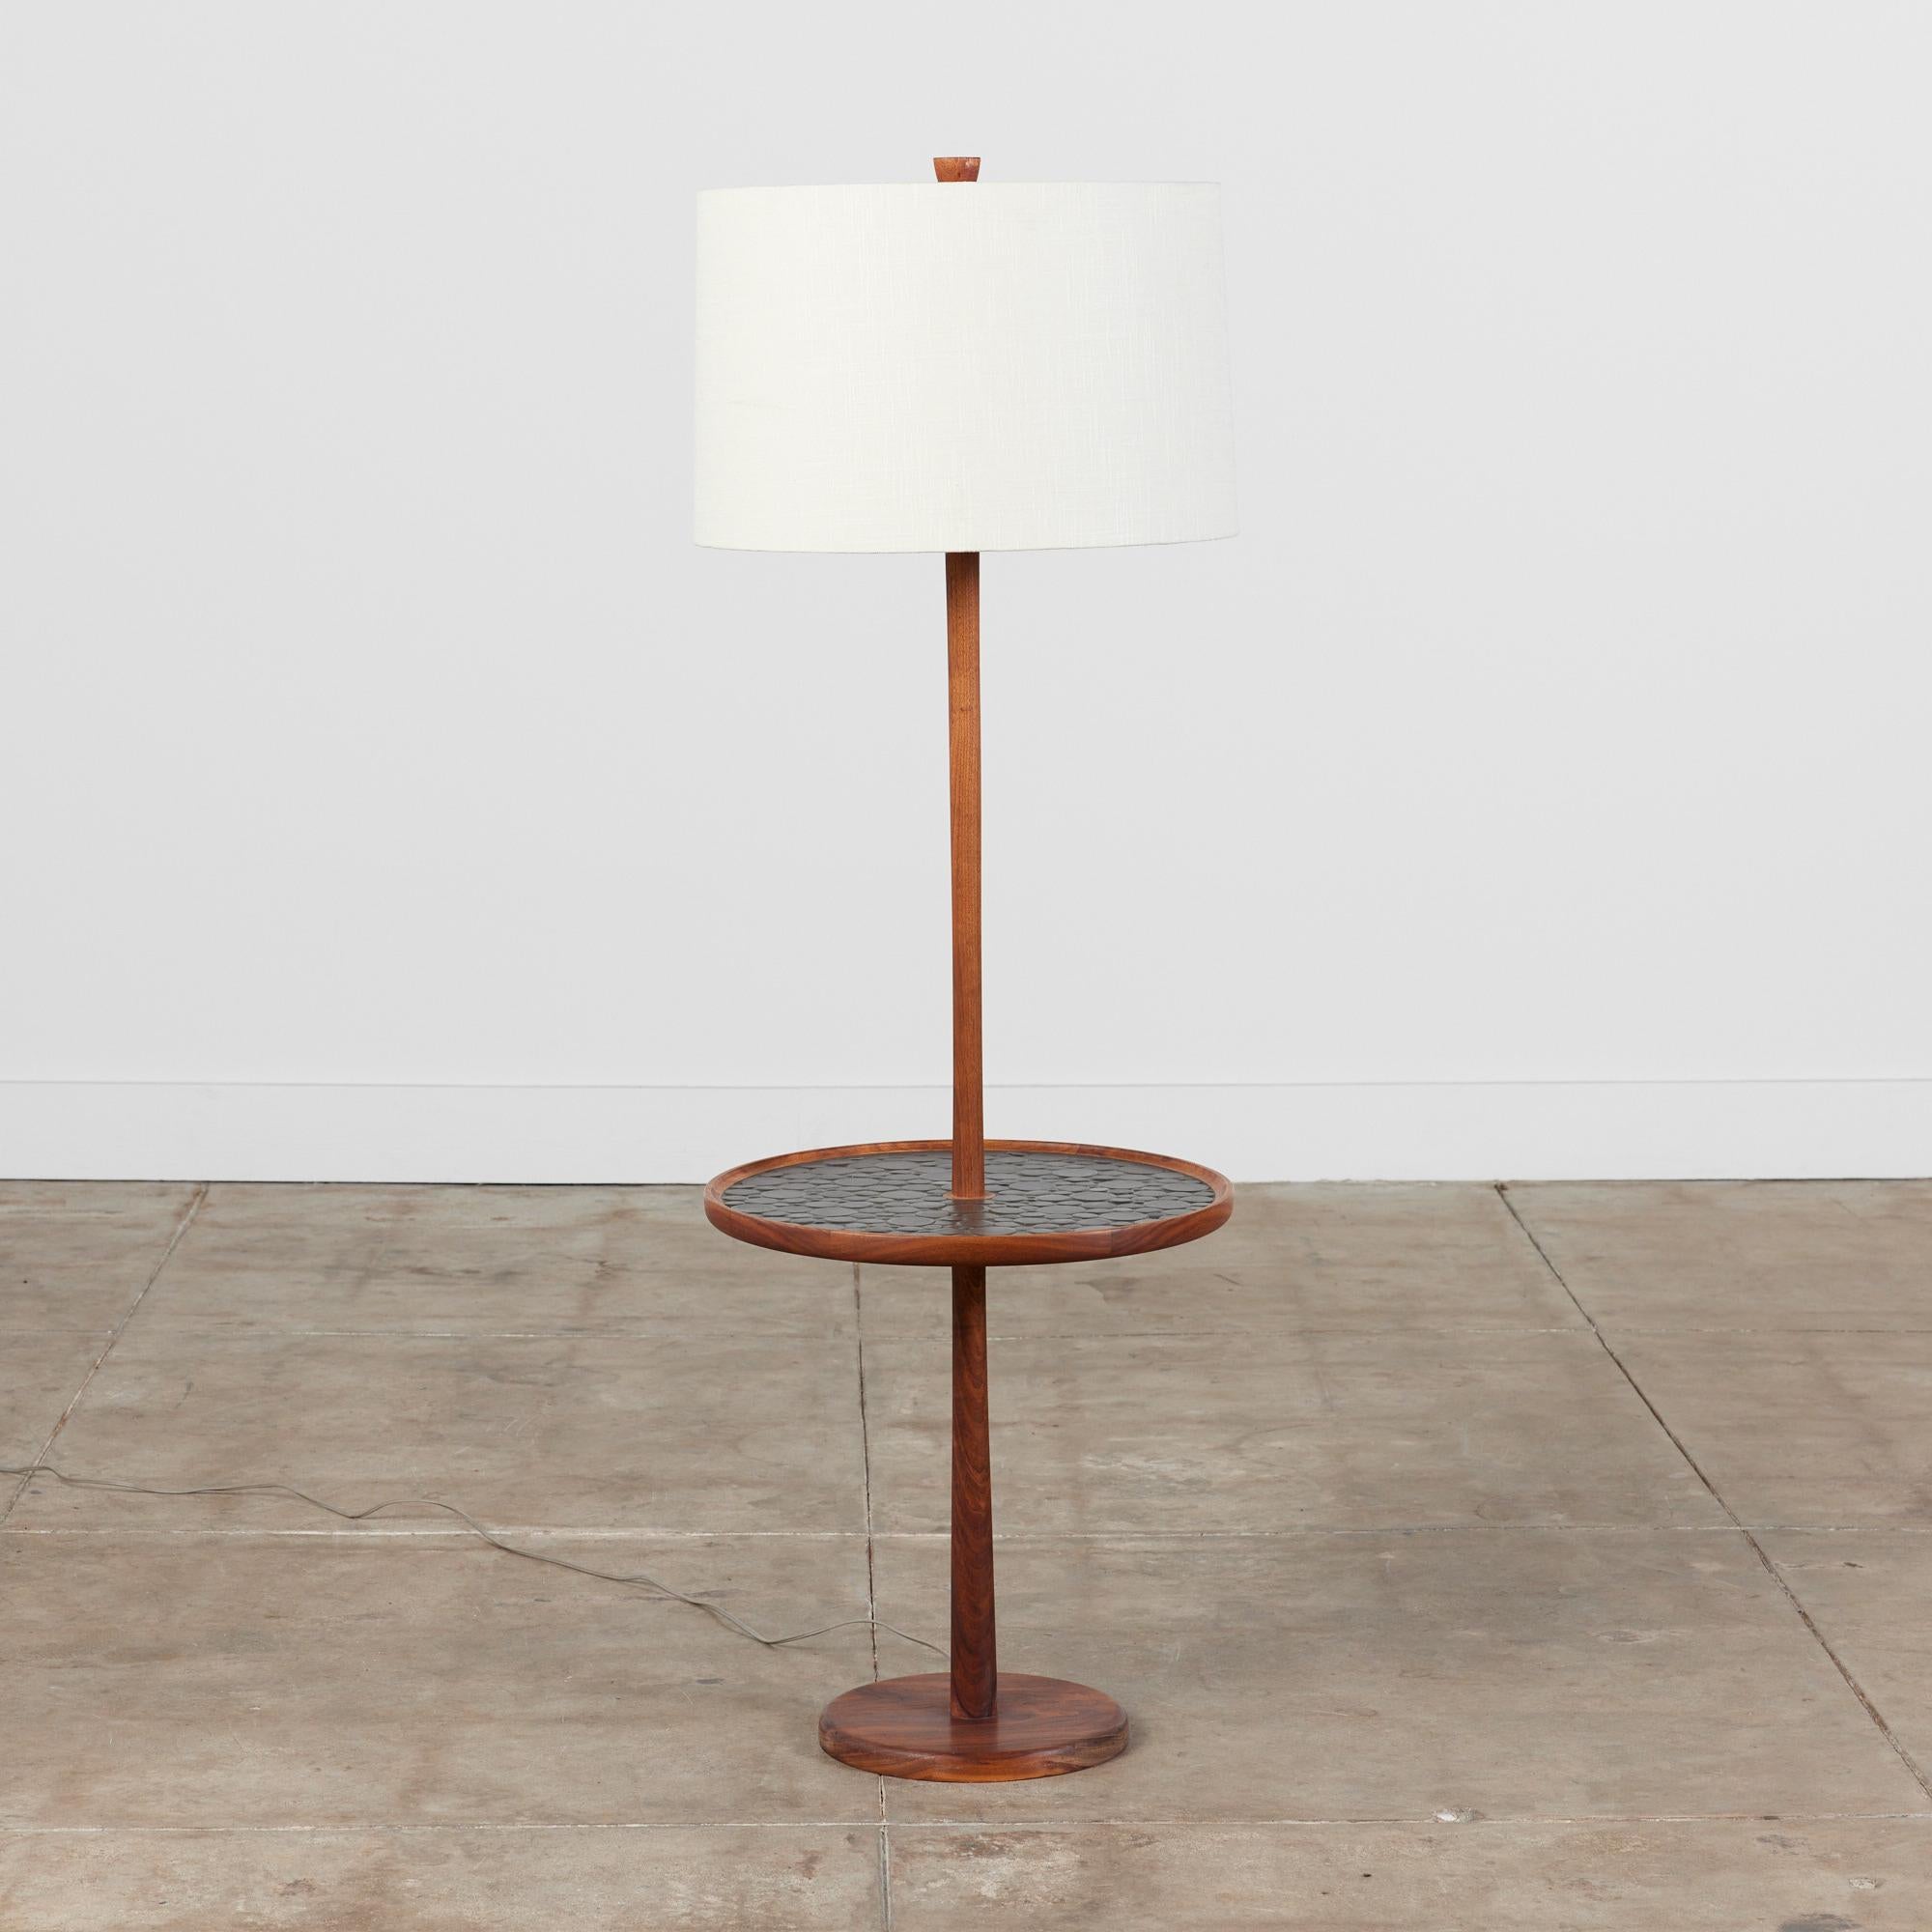 Gordon & Jane Martz floor lamp with mosaic tile round side table. This piece features a walnut base with inlaid black ceramic coin tiles on the table top. The lamp has a newly made linen shade and original wiring.

Dimensions:
18.25